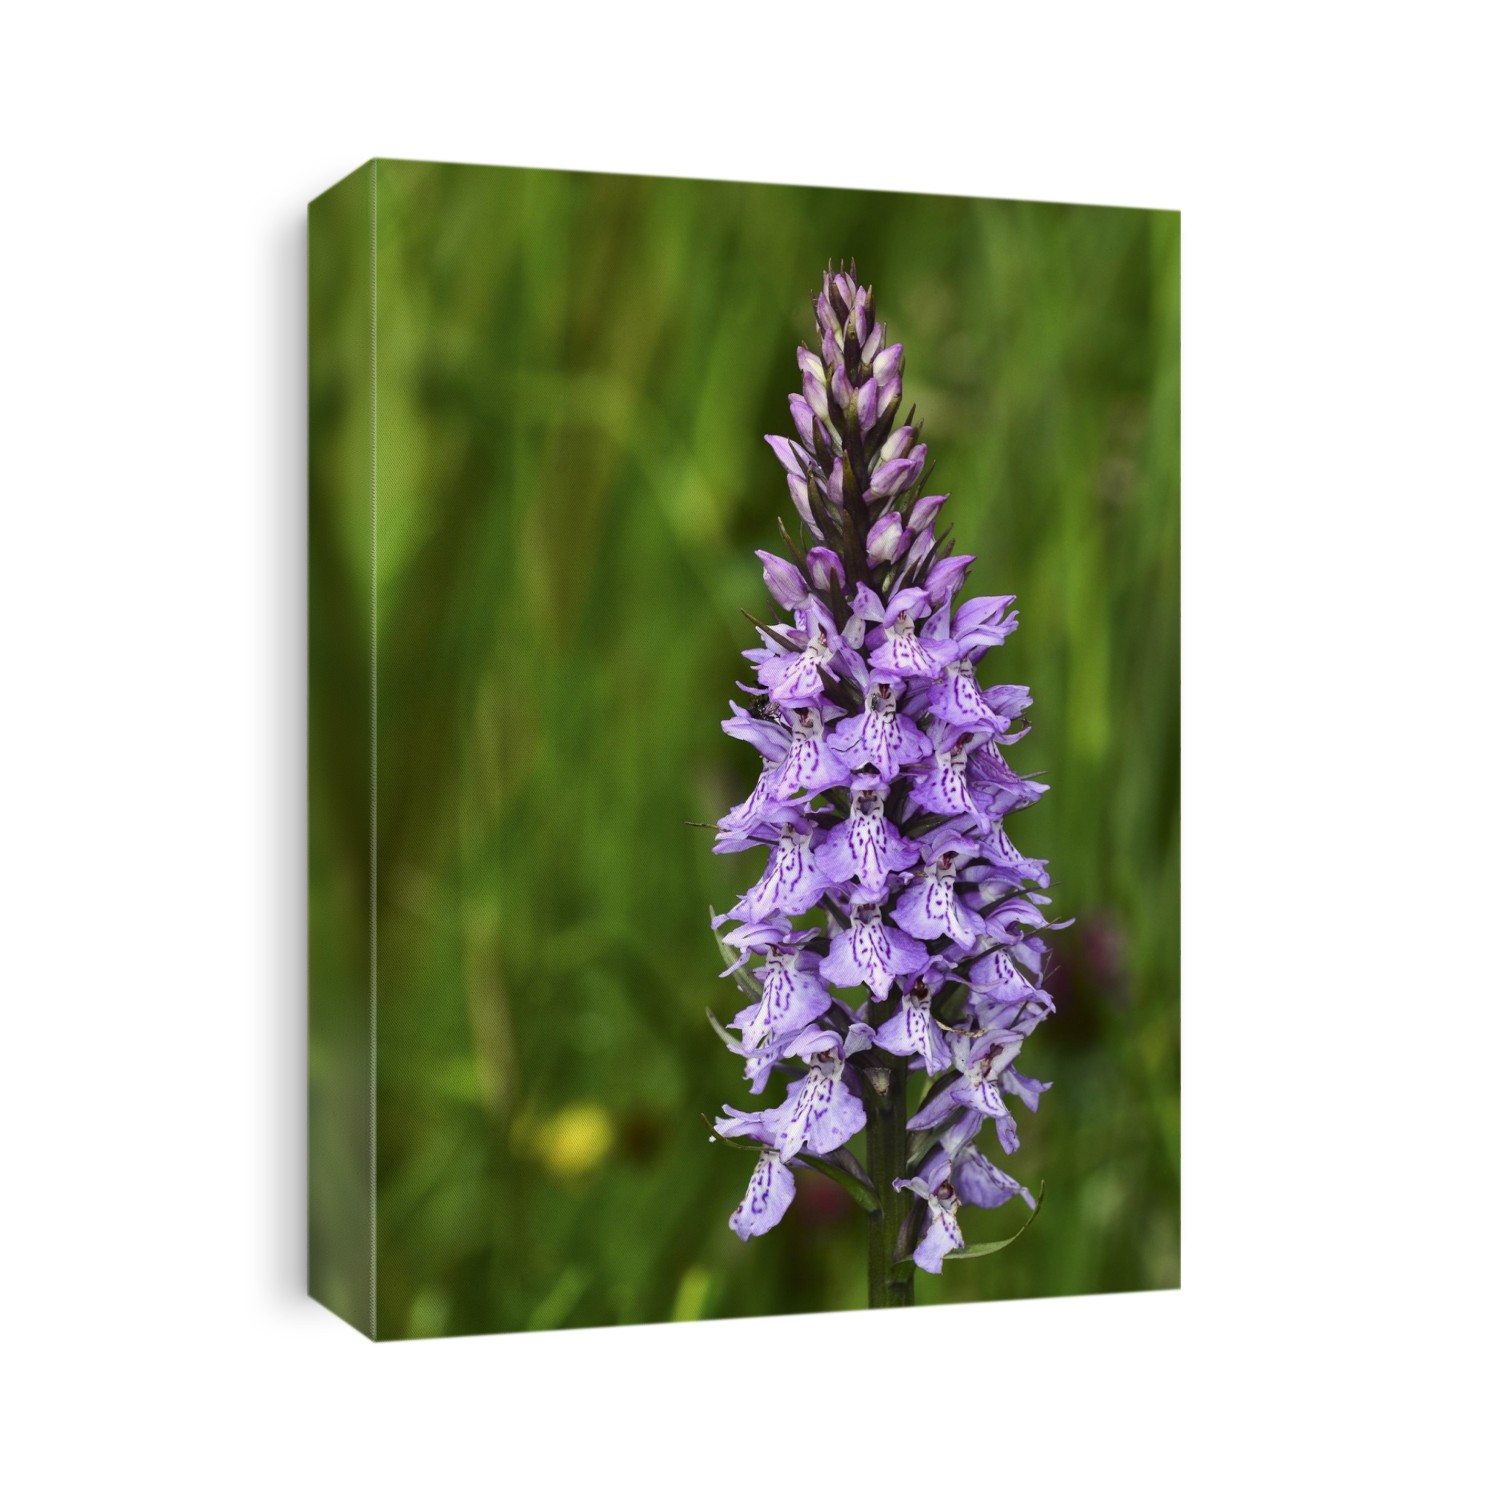 Common spotted orchid (Dactylorhiza fuchsii) in flower. Photographed in June, in Dorset, UK.